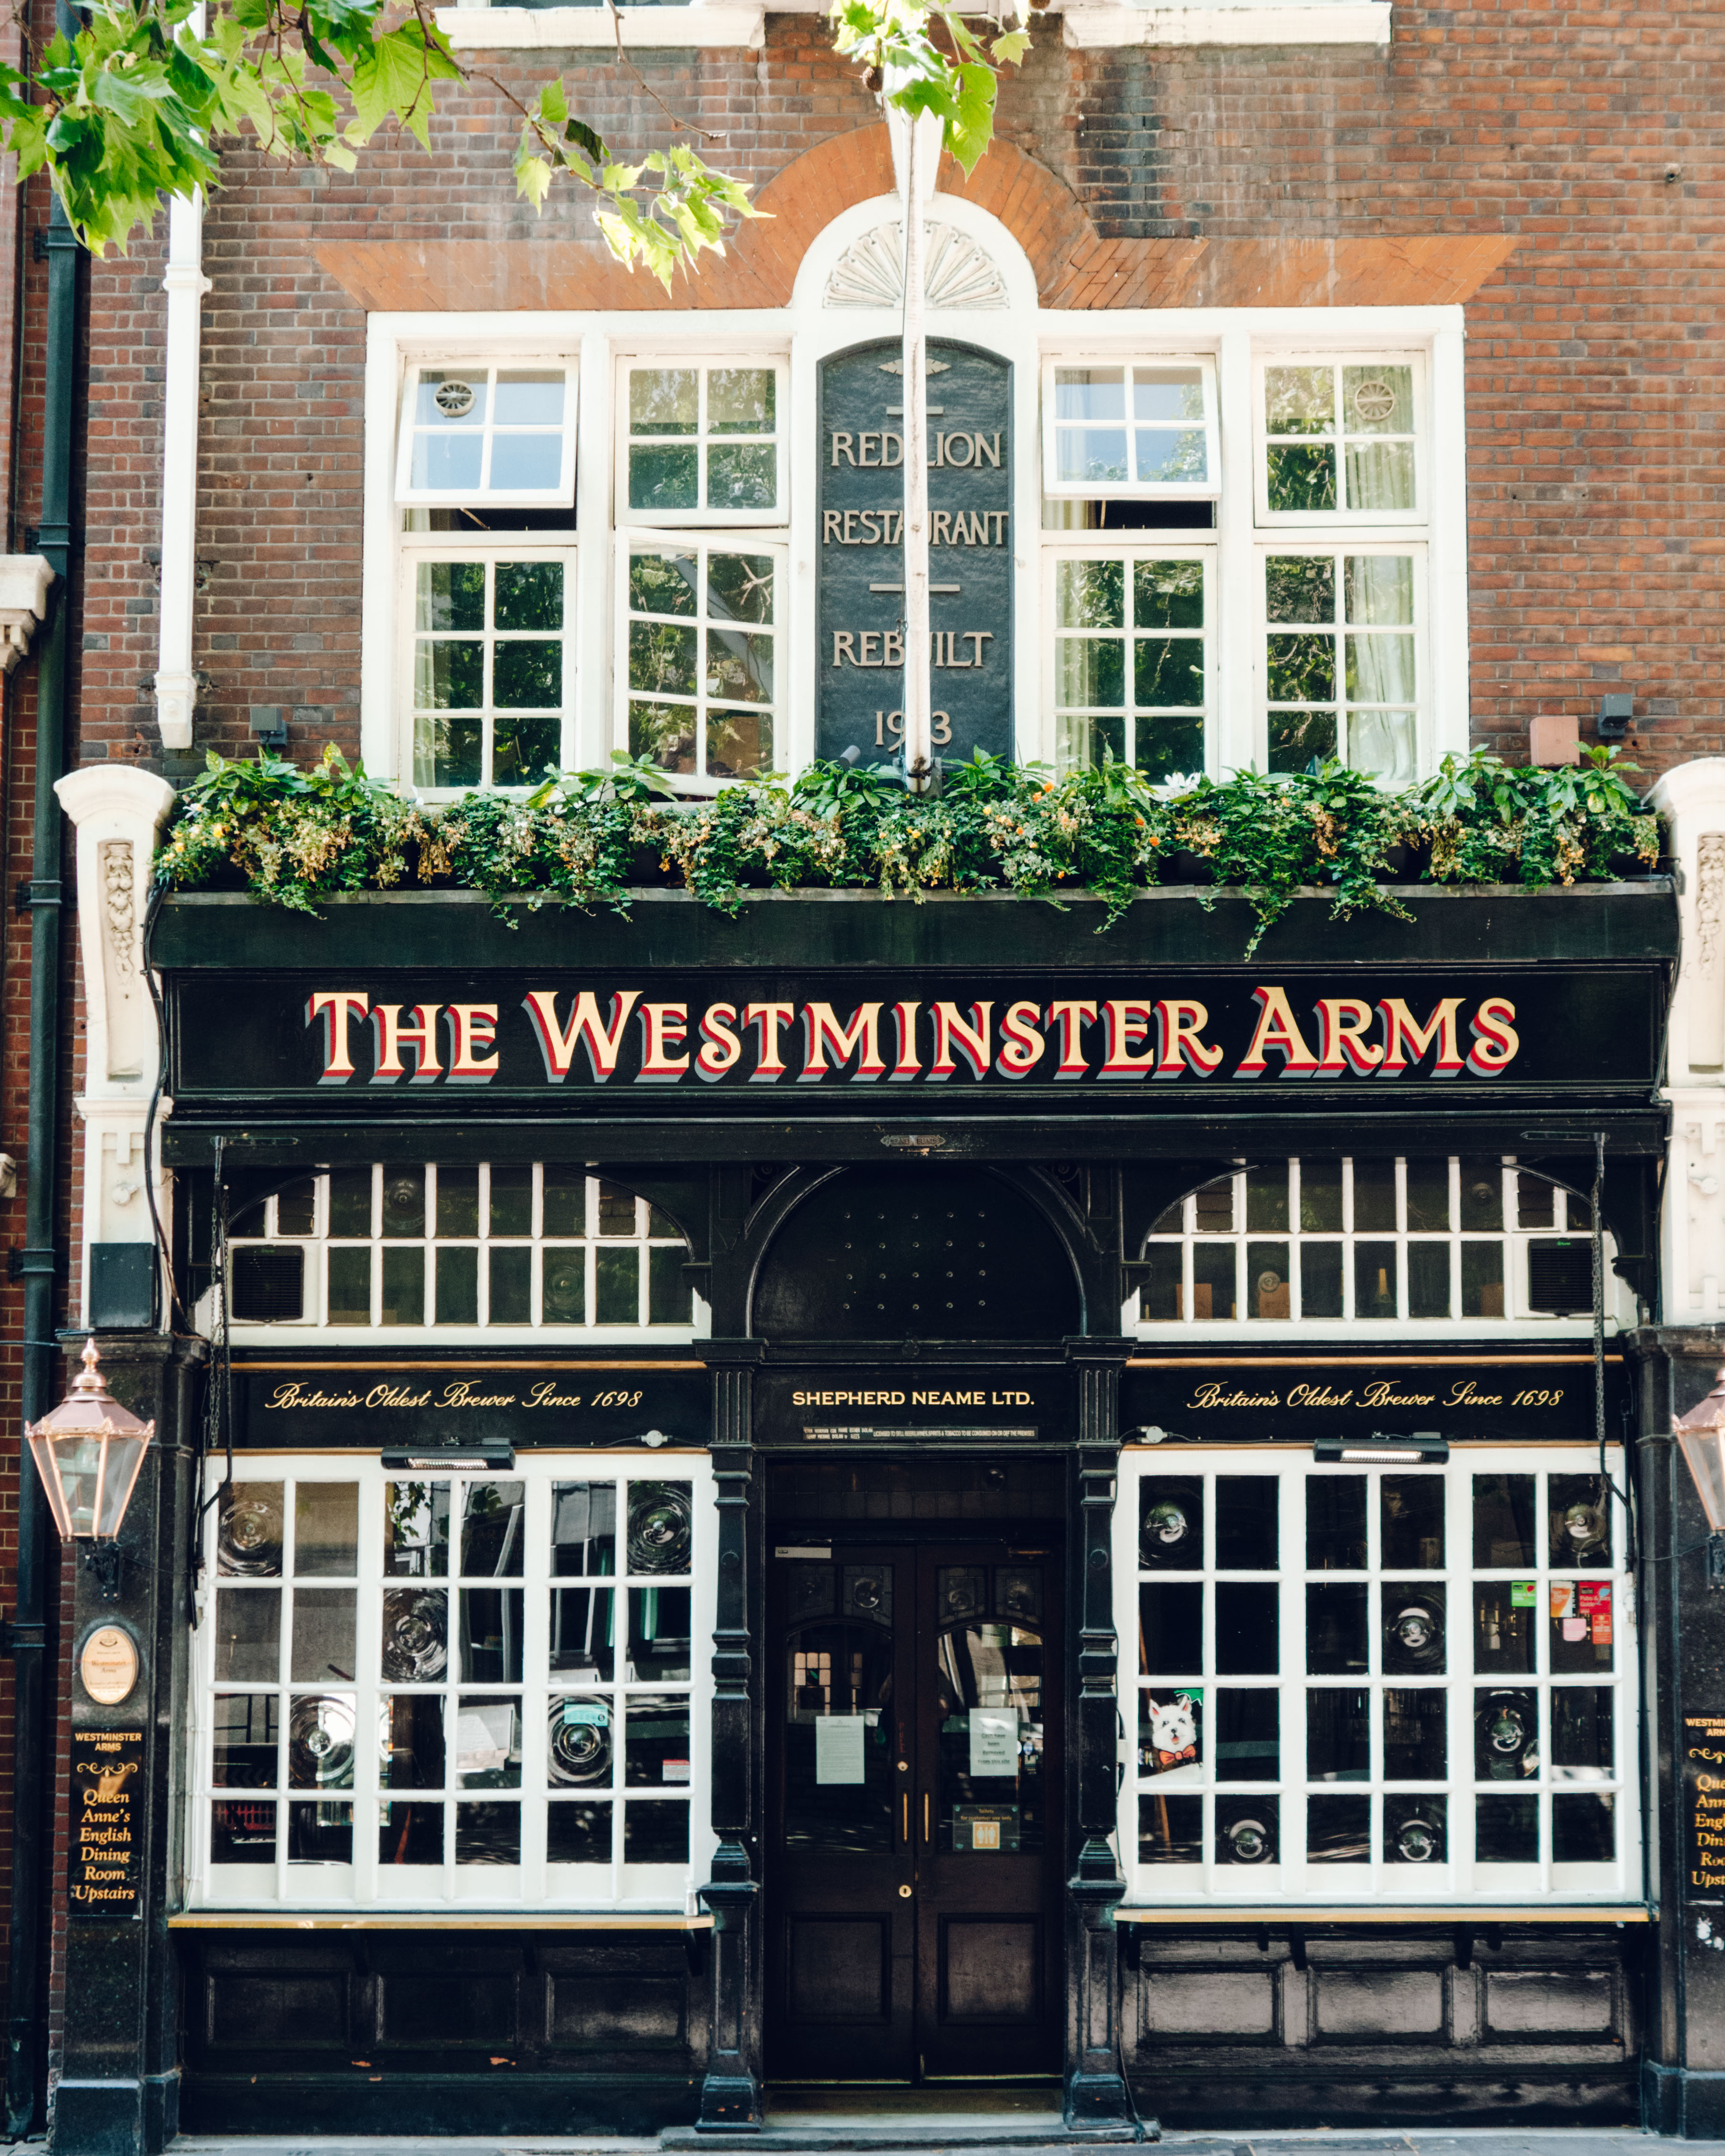 Front of the Westminster Arms Pub